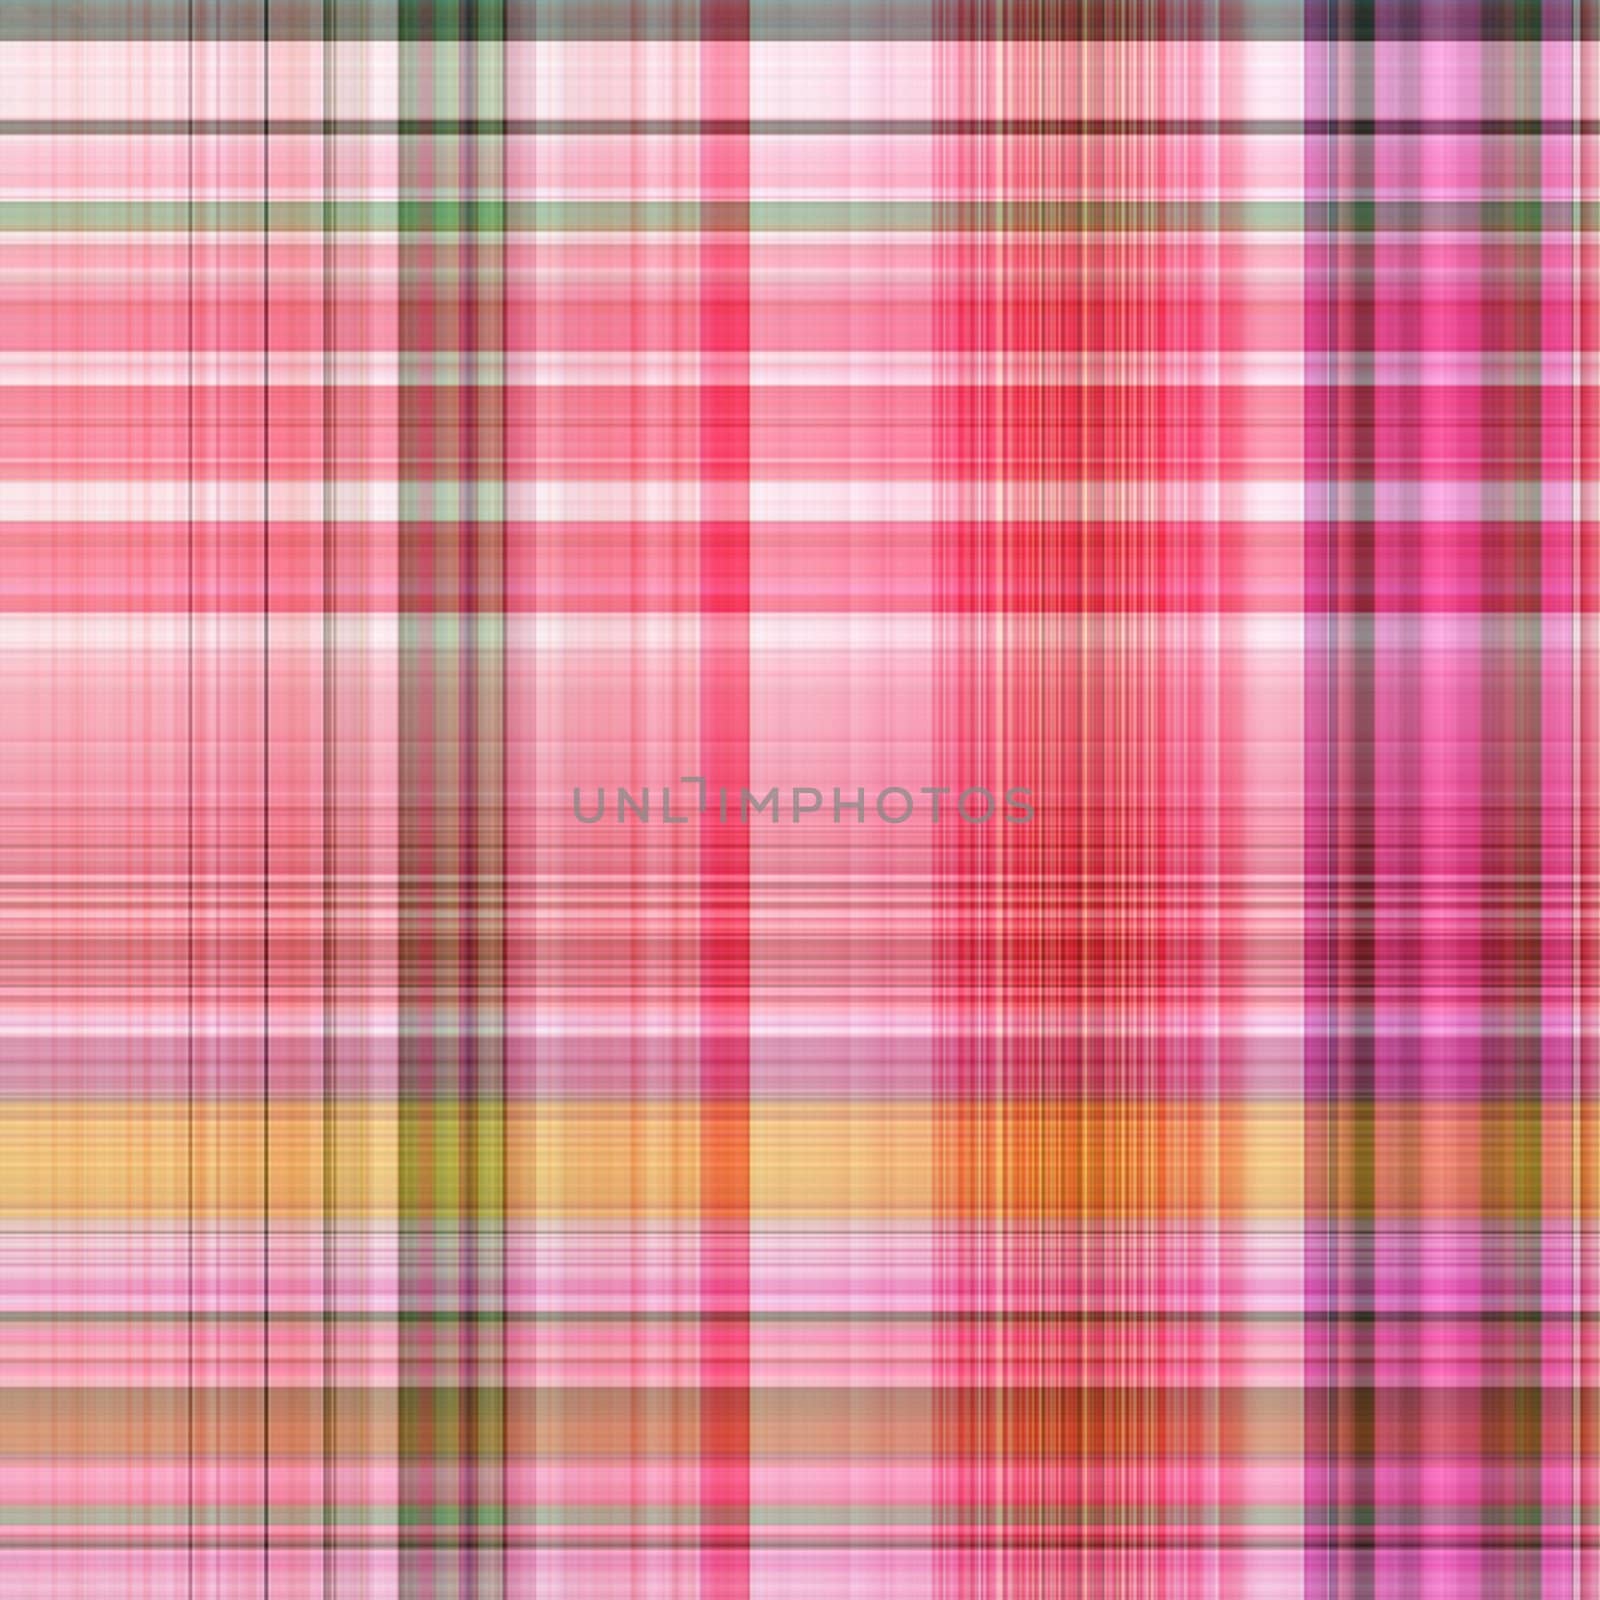 abstract background in pink scheme, for www